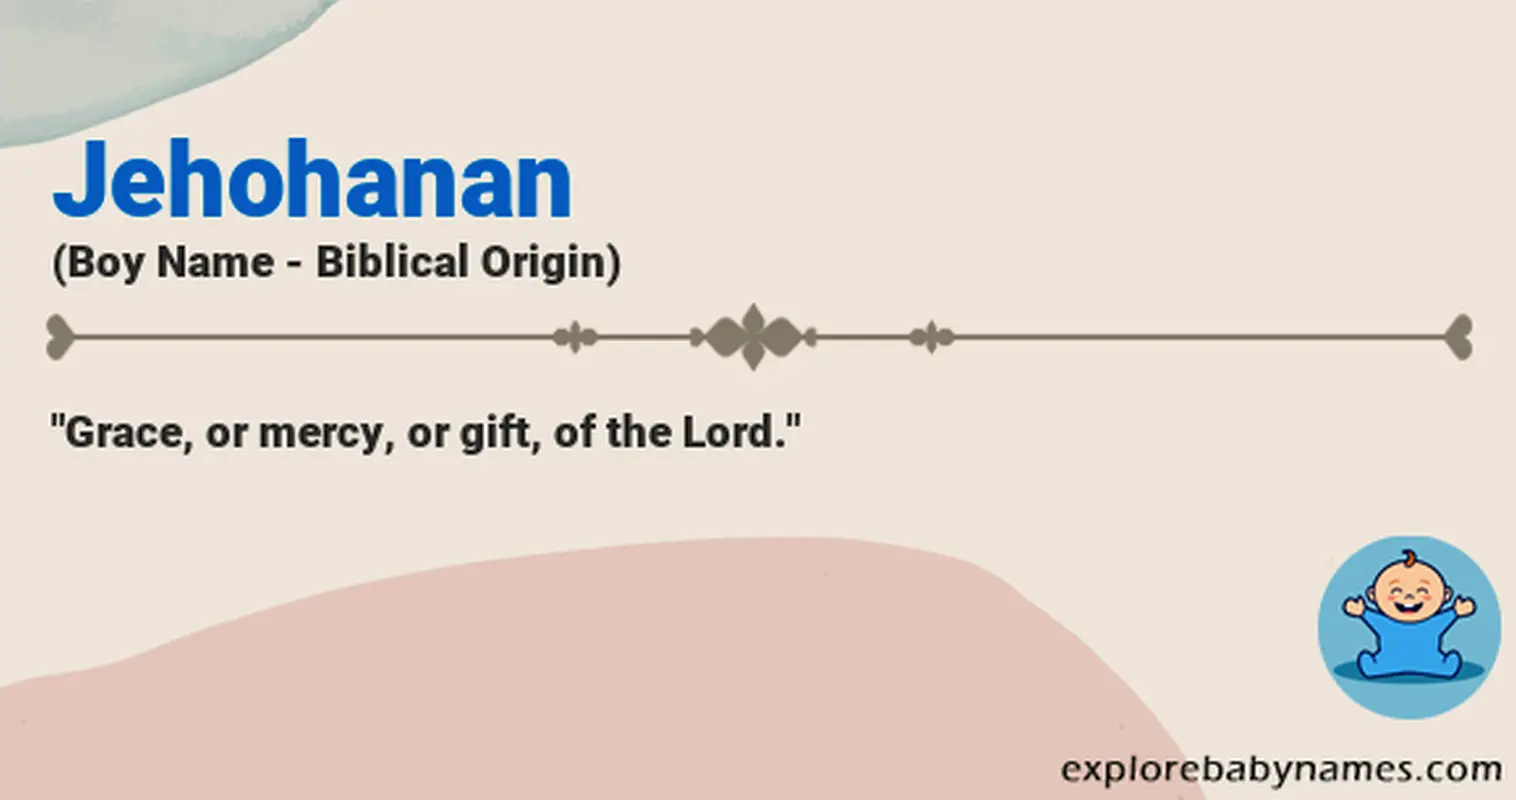 Meaning of Jehohanan